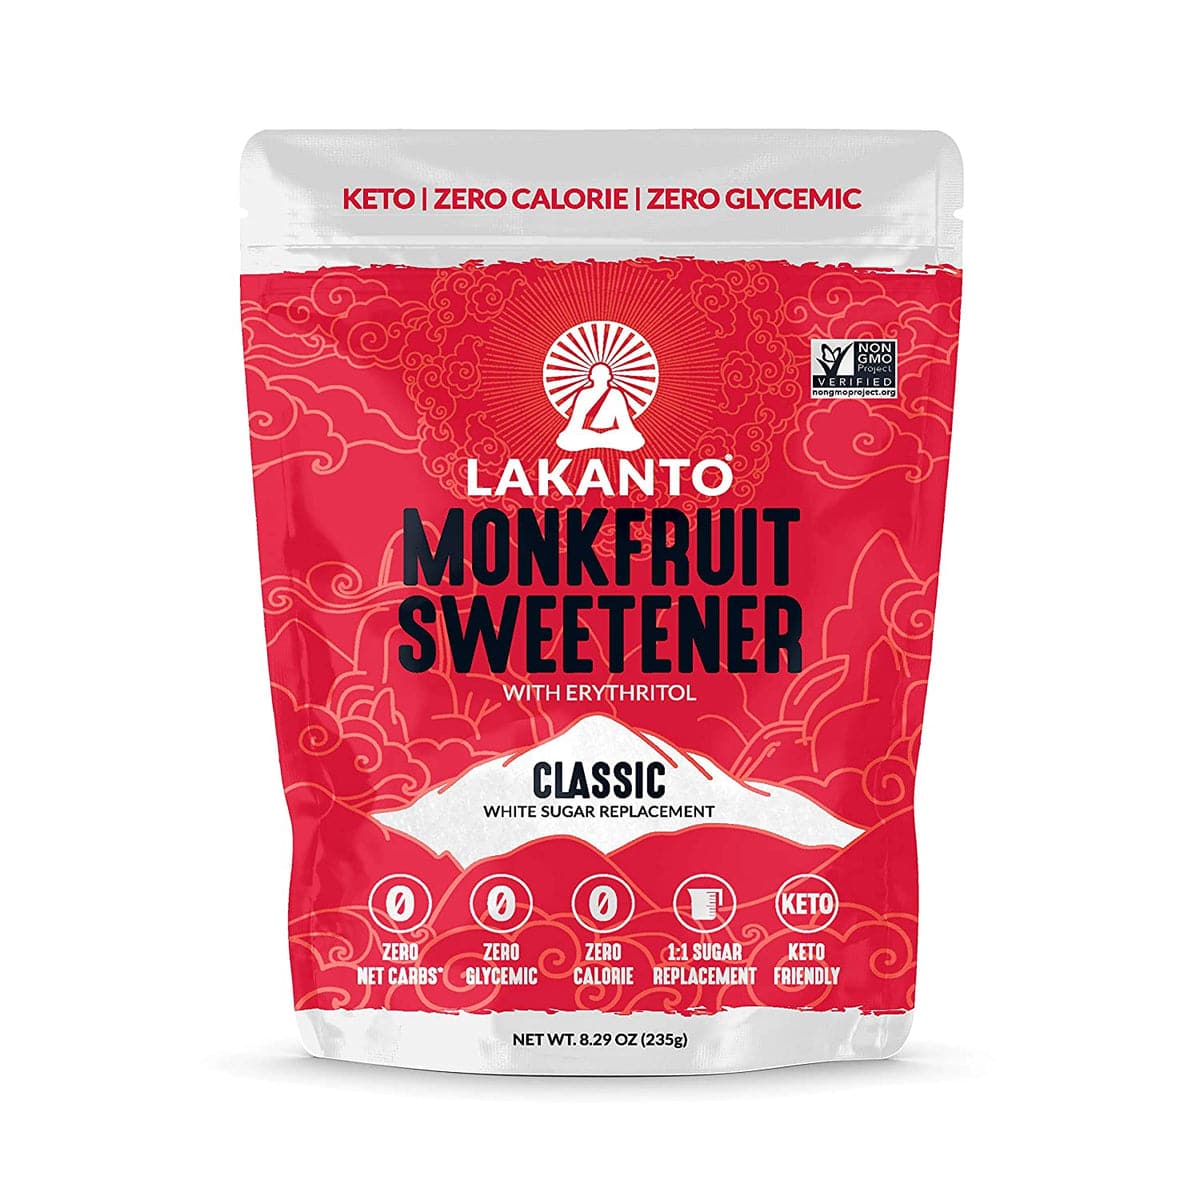 Lakanto Classic Monkfruit 1:1 Sugar Substitute 
(Use Code: OLIVIAWYLES for 15% OFF at checkout)